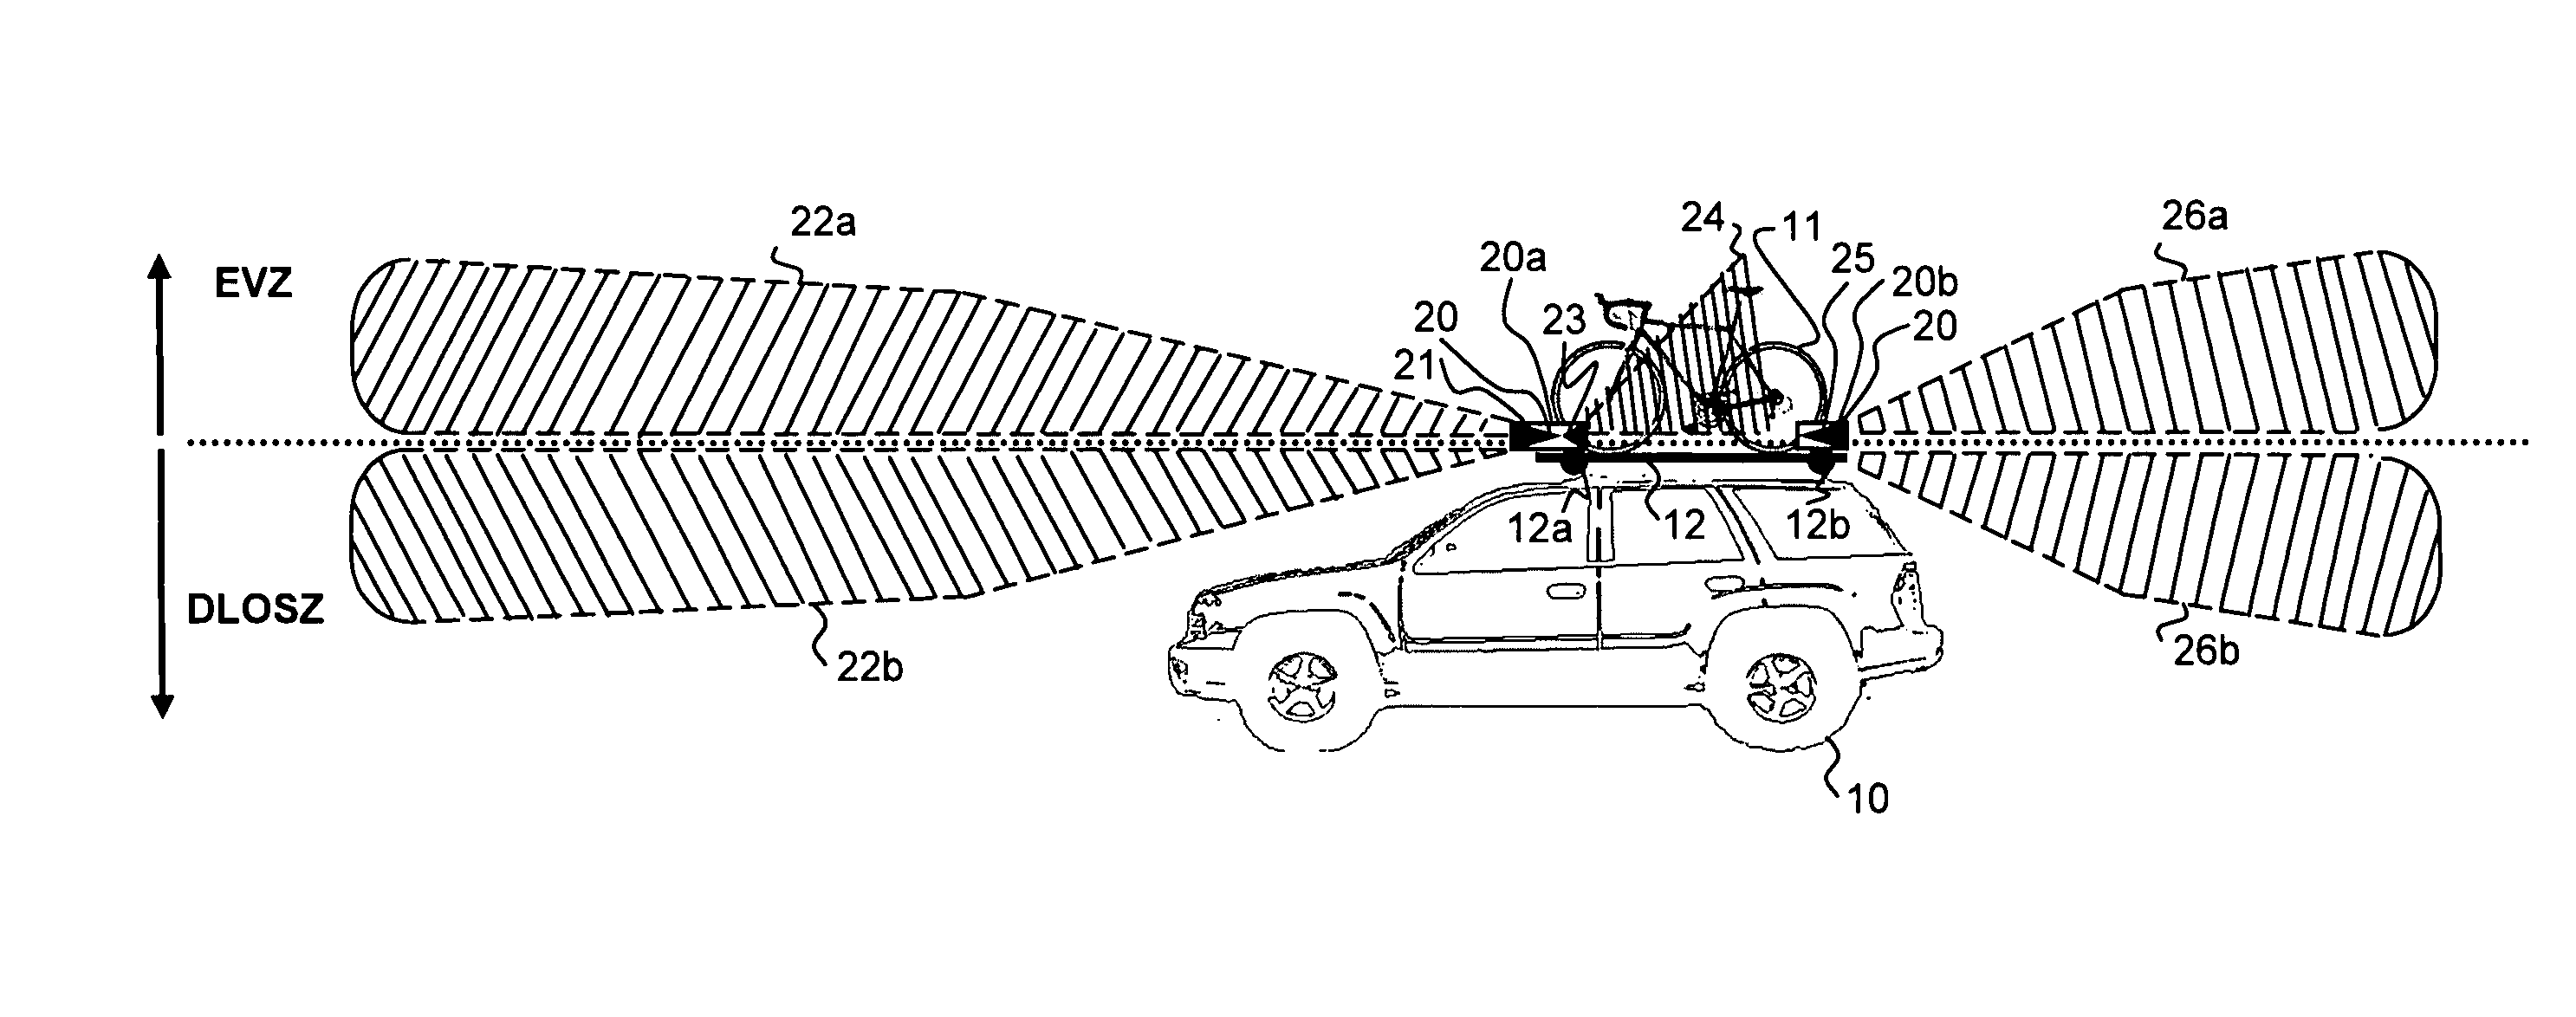 Radar collision warning system for rooftop mounted cargo